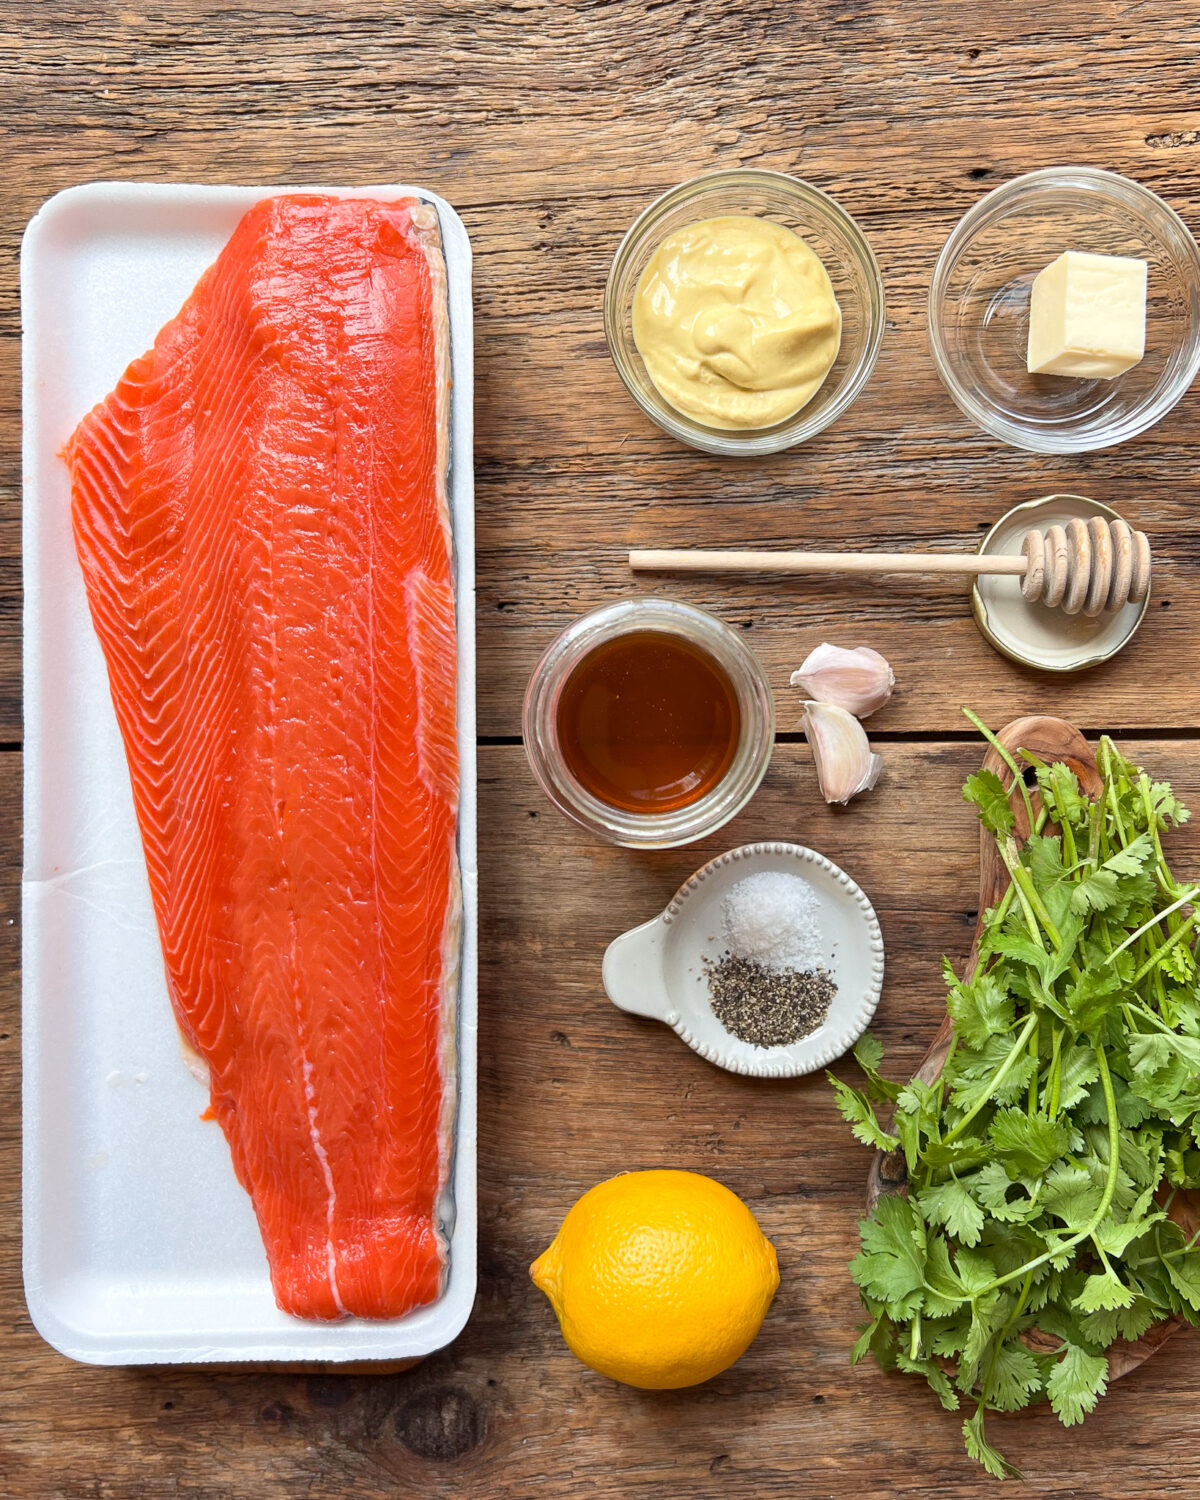 Ingredients laid out to make a cedar planked salmon recipe.